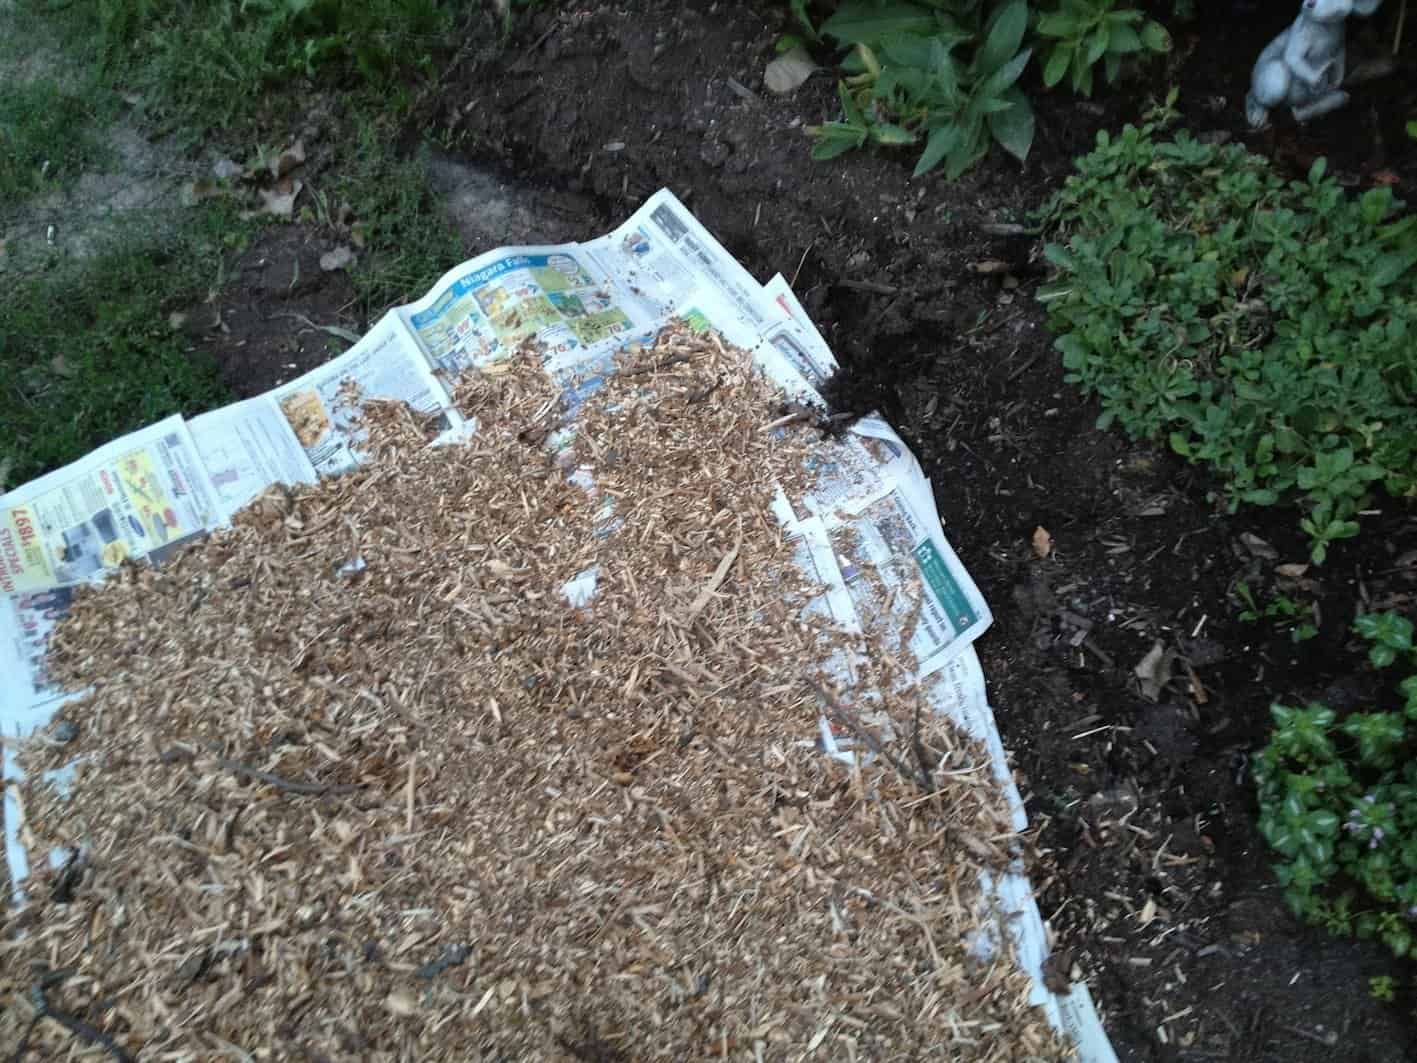 Newspaper laid under the mulch will help prevent weeds from sprouting in the front path at Jason’s and Heather’s garden.